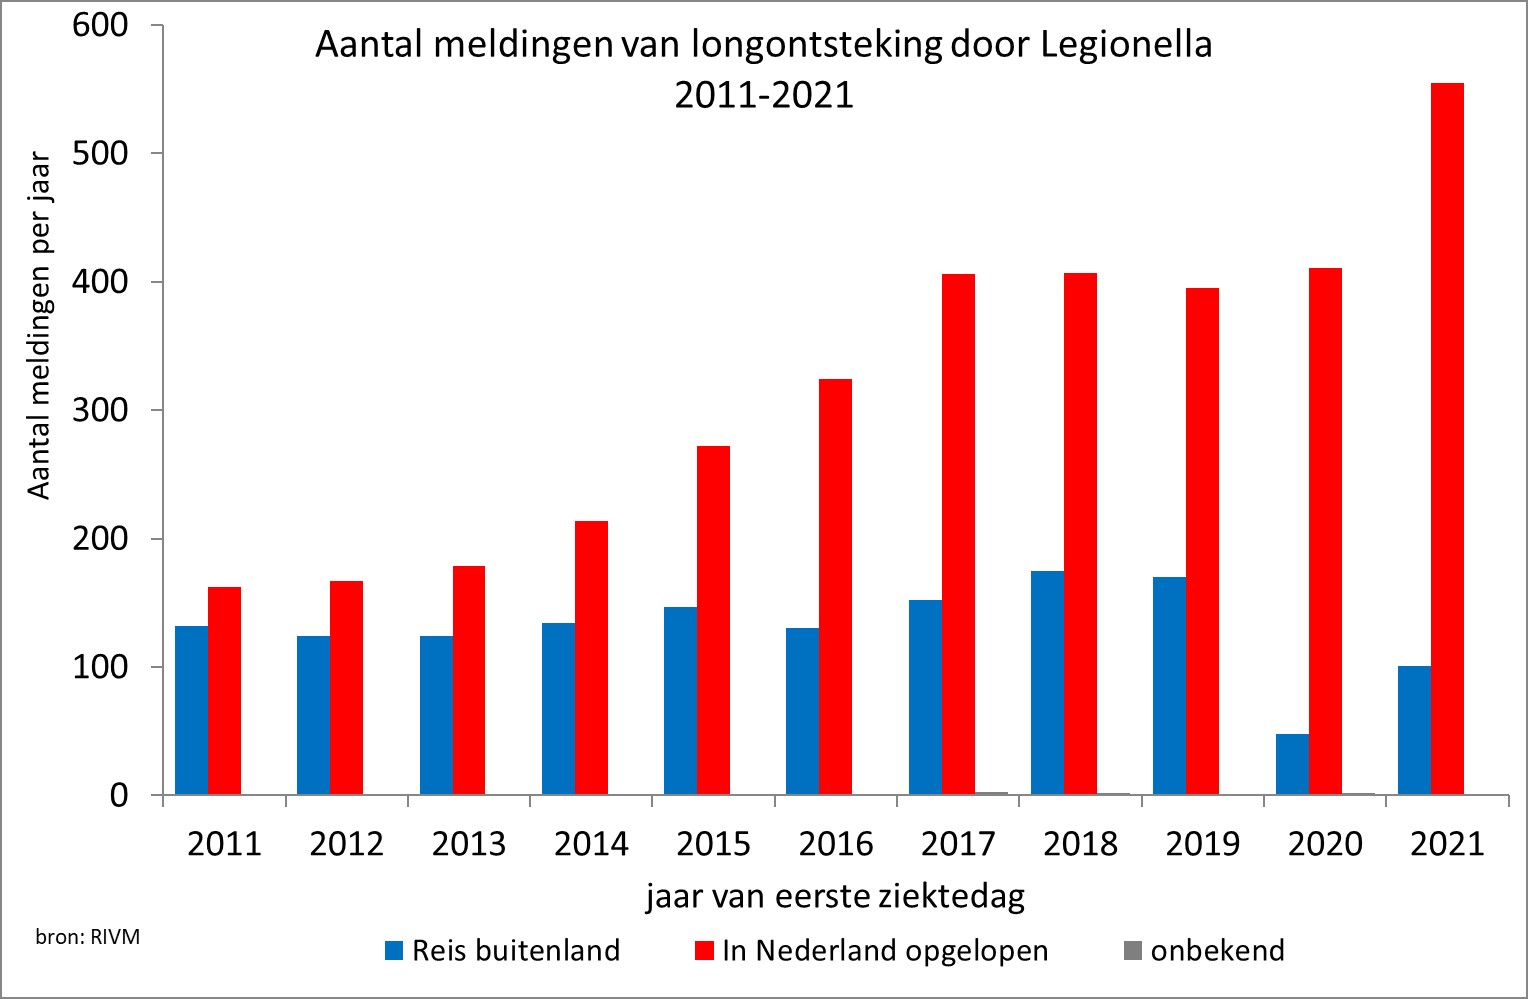 The graph shows the annual number of notifications of Legionnaires disease from 2011-2021 by infection acquired domestic (in the Netherlands) or abroad. The number of domestic cases varies from 162 to 556 cases. The number of domestic cases show an increasing trend from 2012 – 2017. In 2018, 2019 and 2020 the number of domestic cases is similar to the number in 2017, with subsequently a sharp increase in 2021. The number of cases with travel abroad was relatively stable from 2011 to 2019, around 124-175 cas